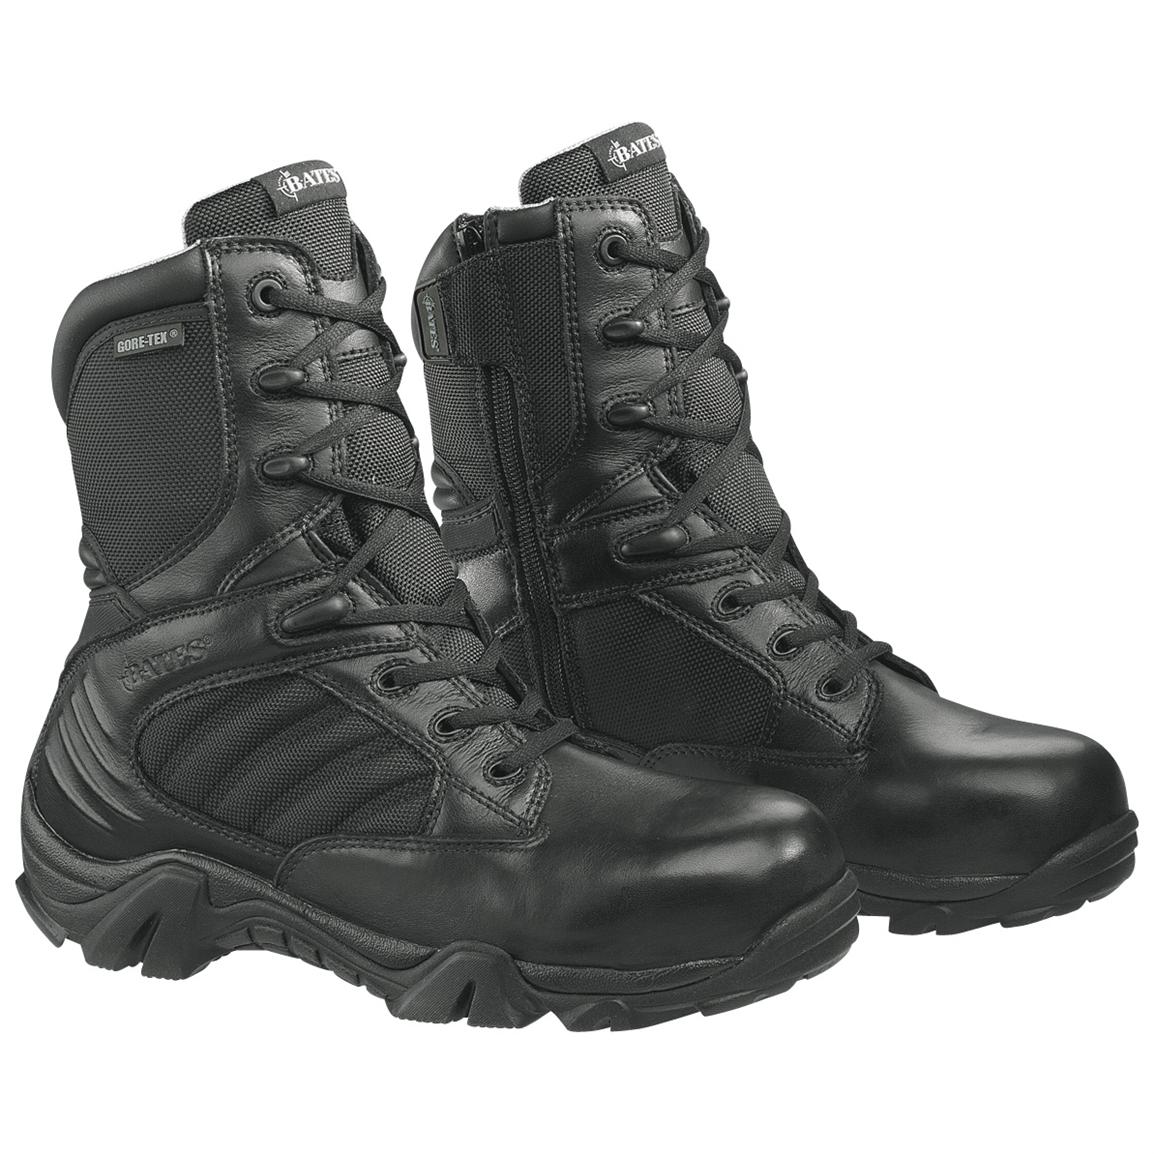 Bates GX-8 Side Zip Boots with Gore-Tex